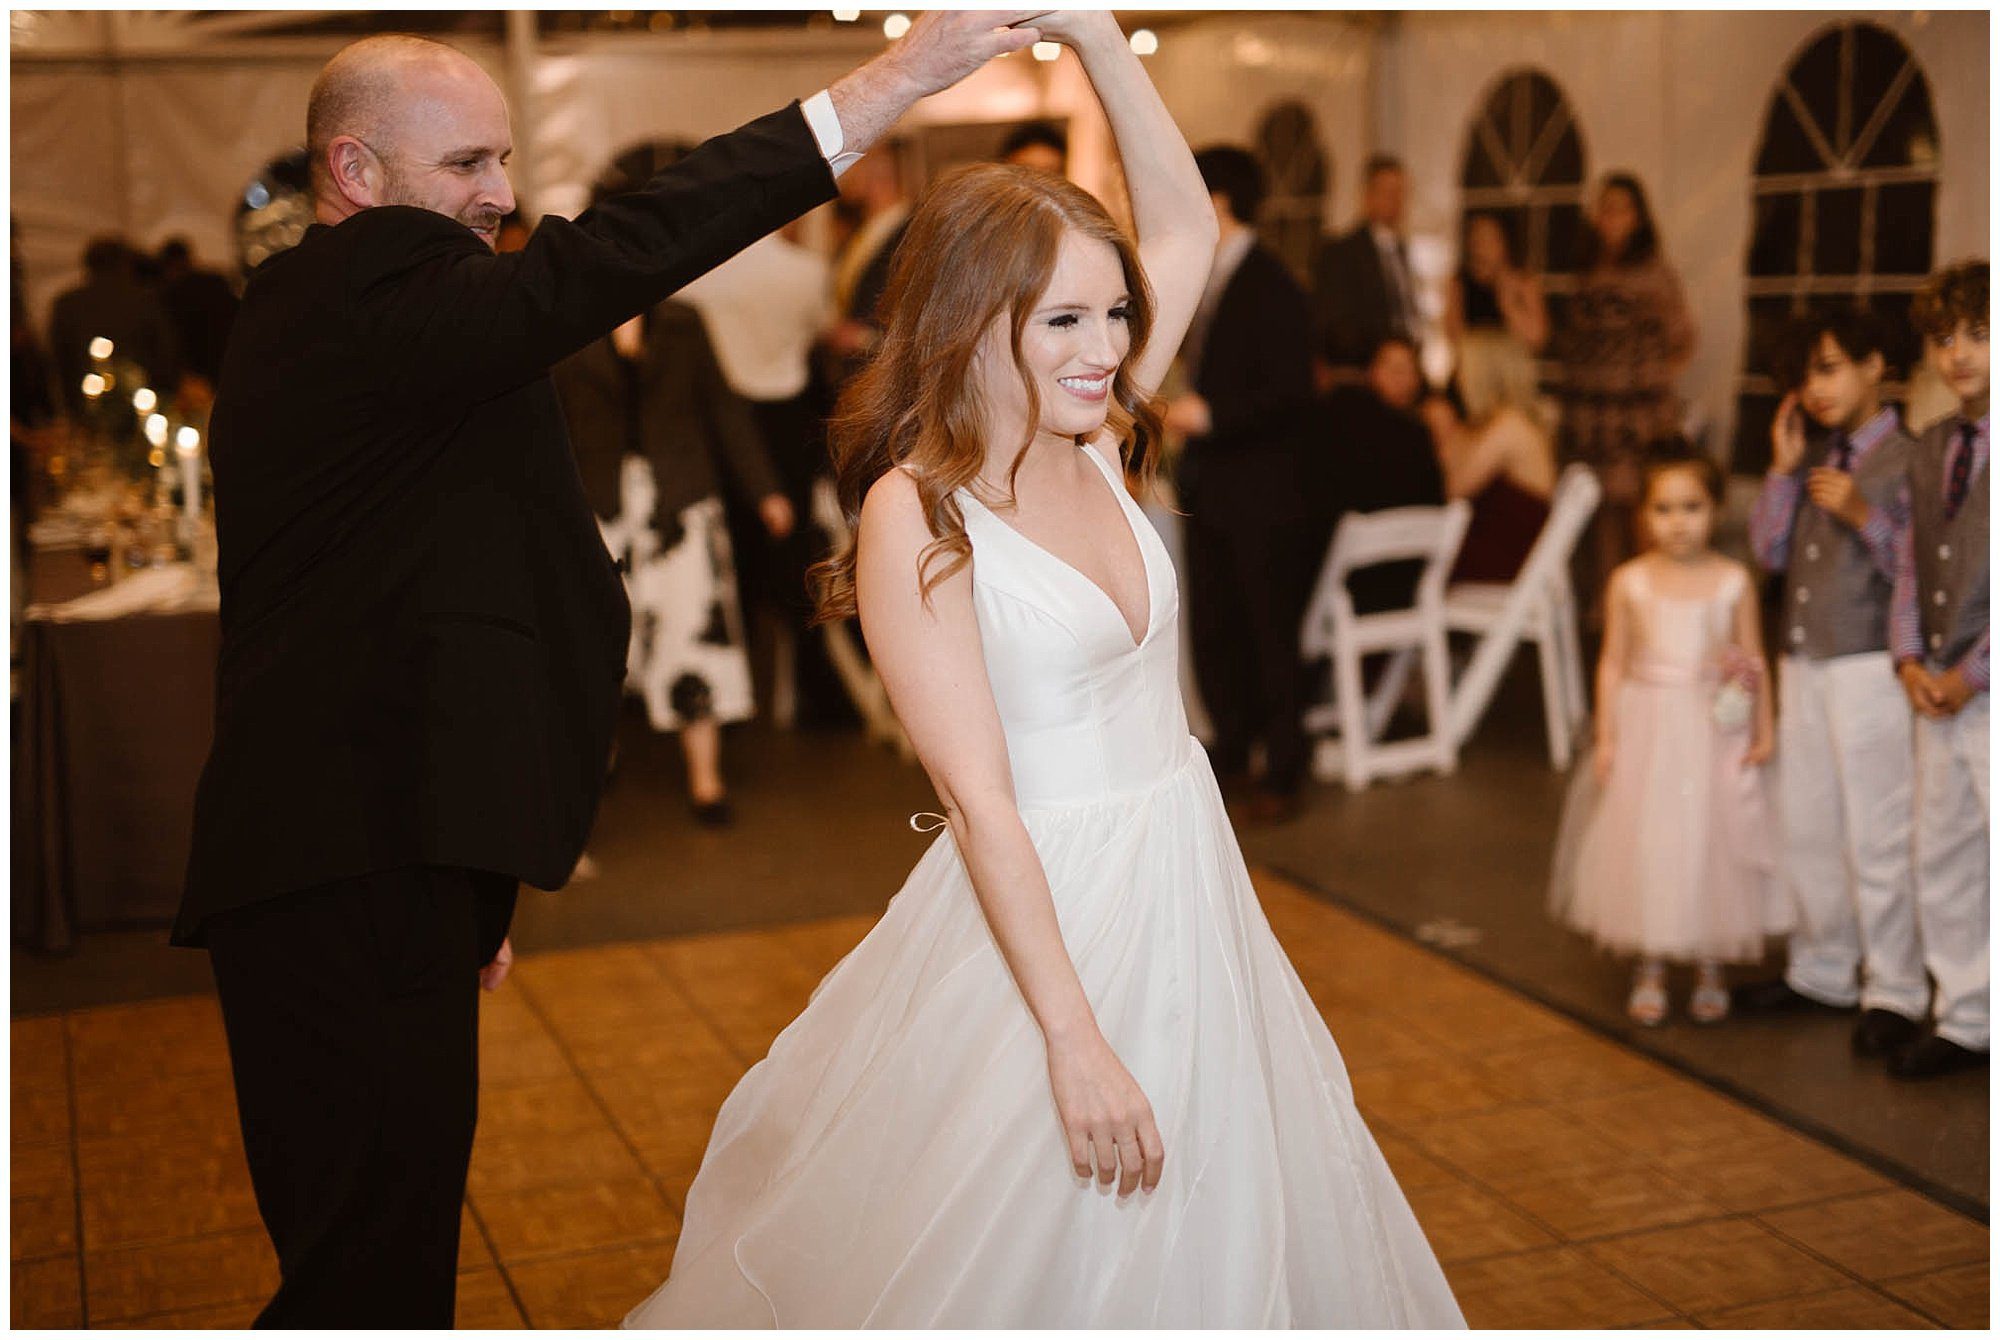 Bride and father first dance photos